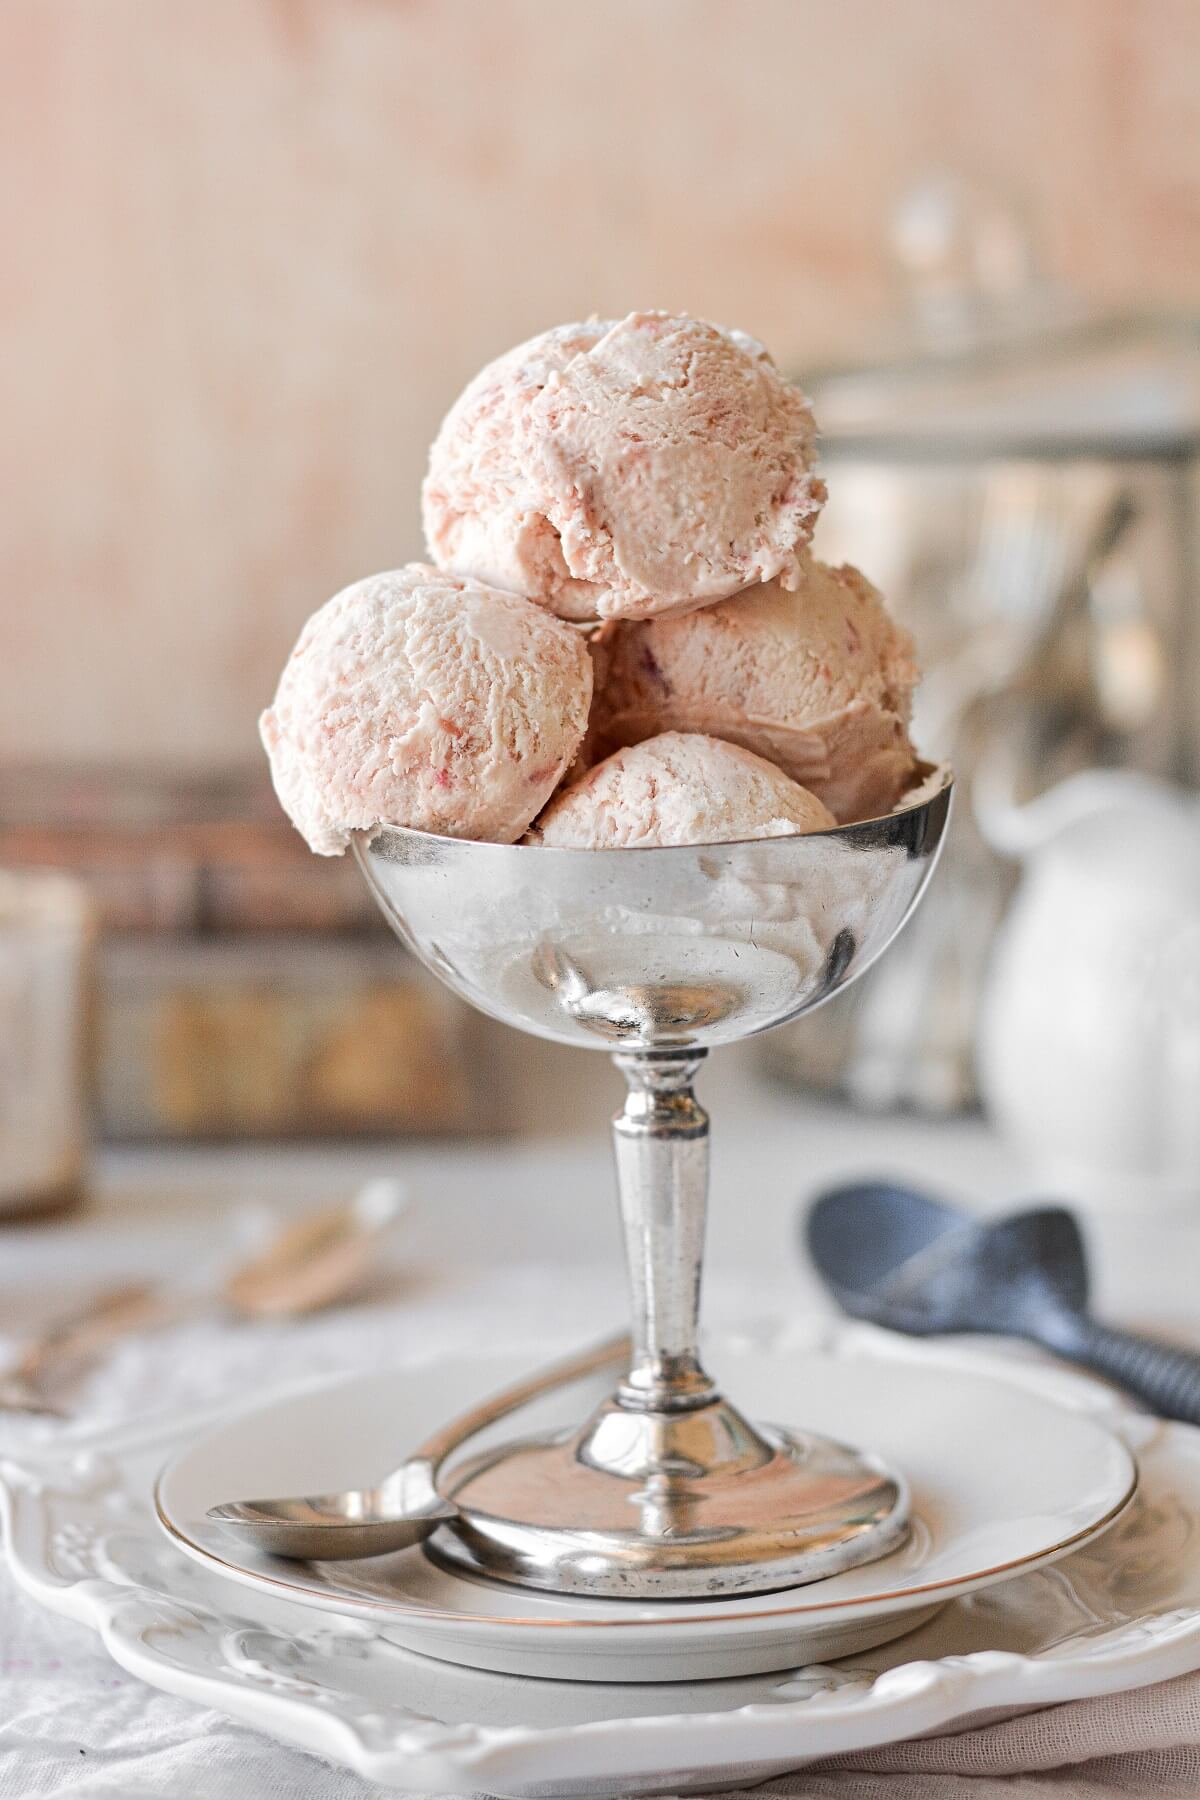 Scoops of roasted rhubarb ice cream in a silver bowl.